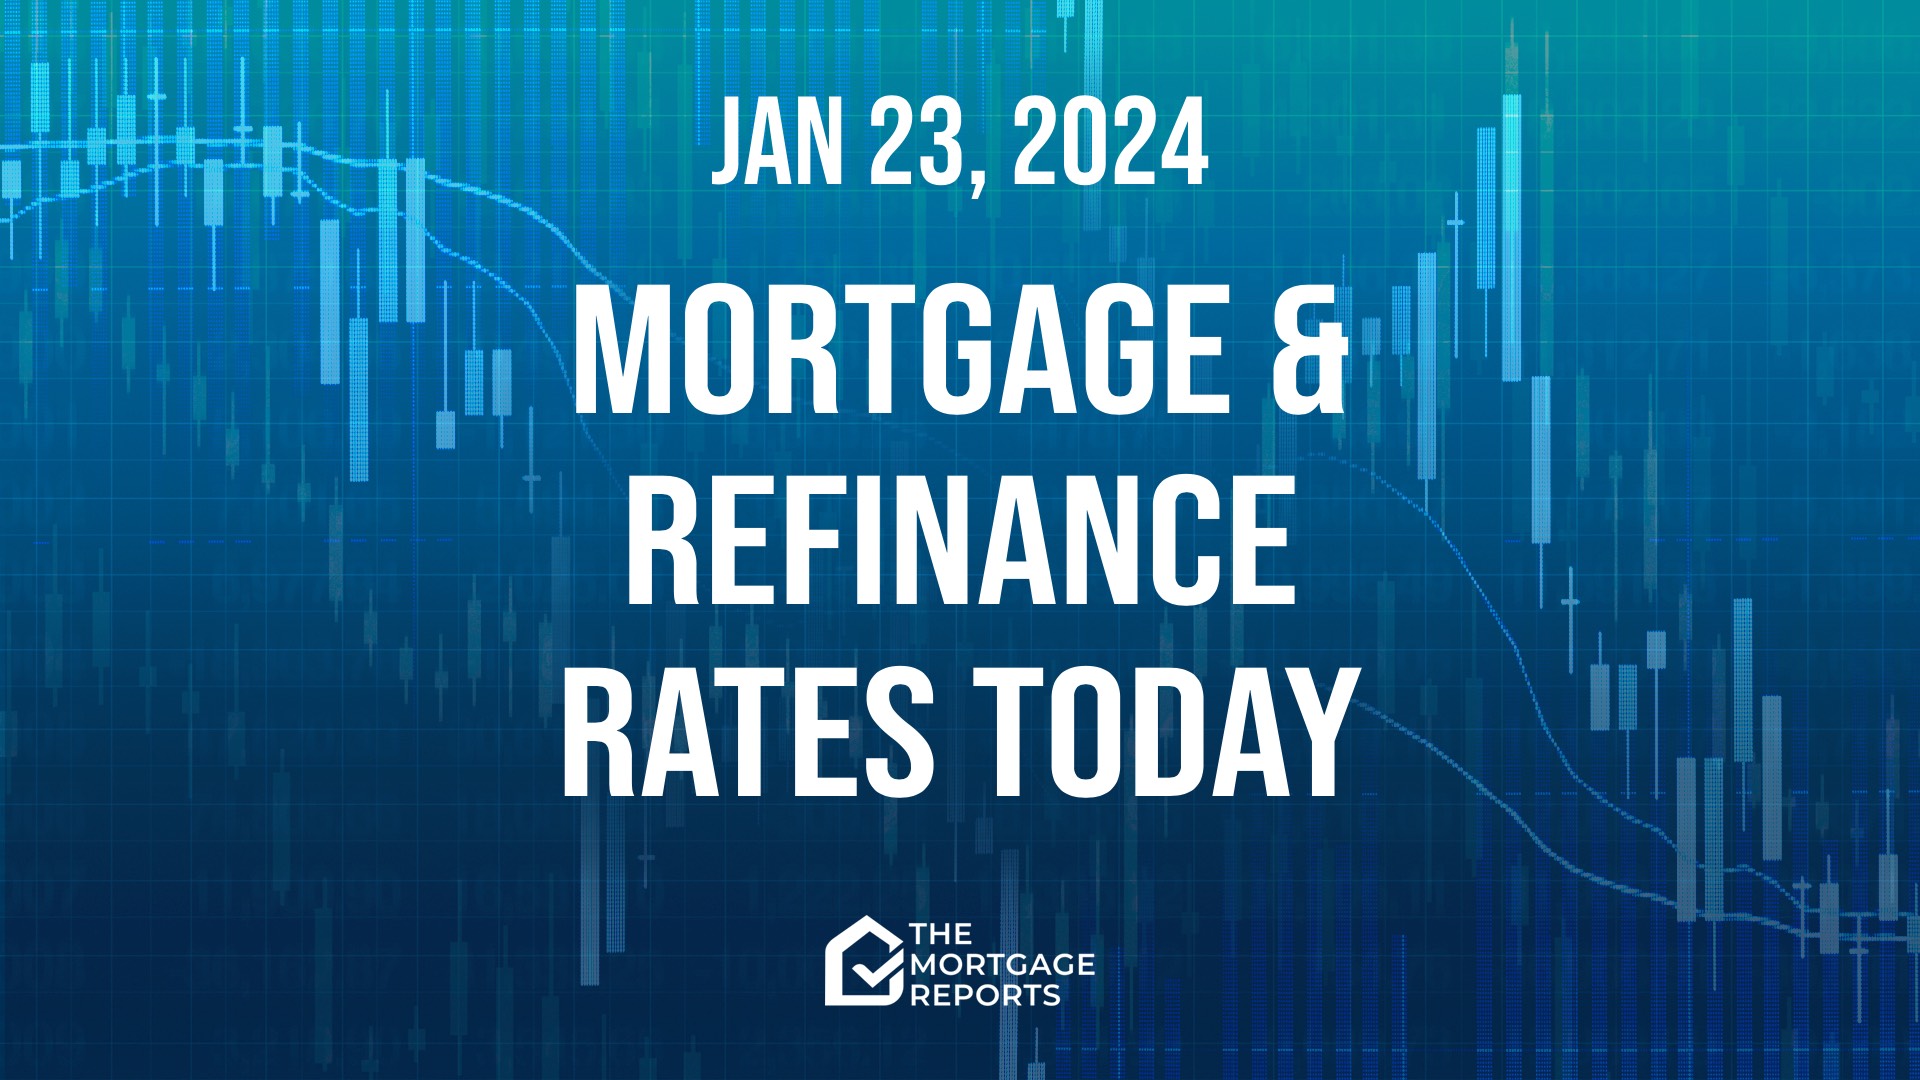 Mortgage rates today, Jan 23, 2024